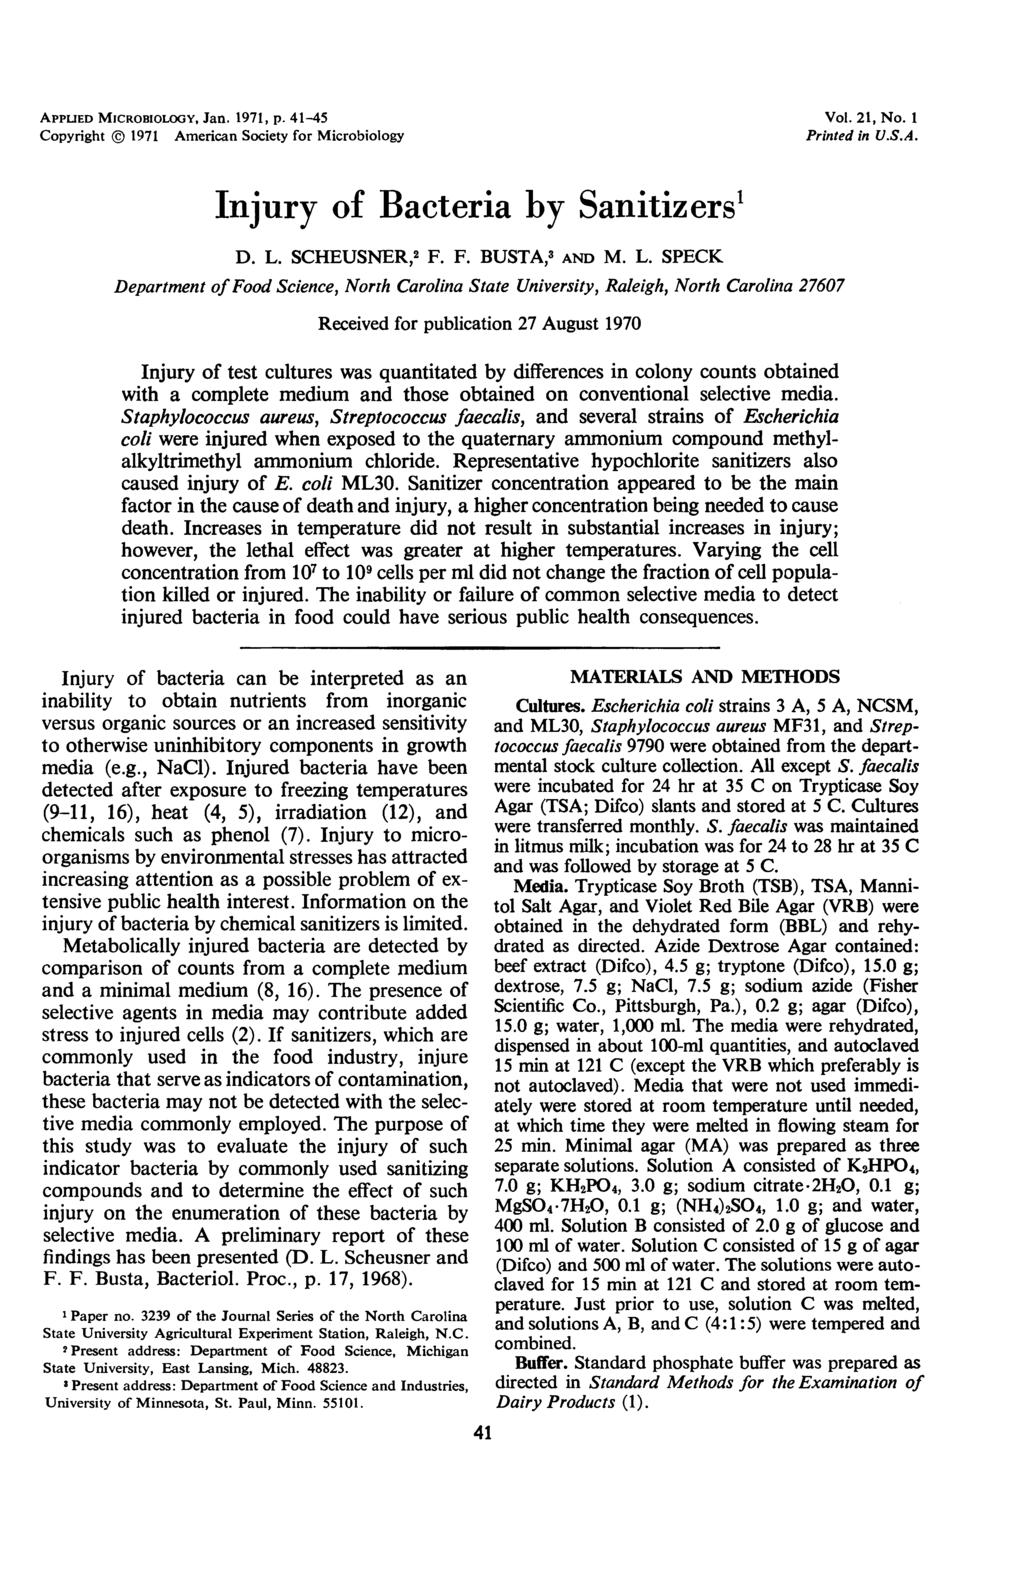 APPLID MICROBIOLOGY, Jan. 1971, p. 41-45 Vol. 21, No. 1 Copyright 1971 American Society for Microbiology Printed in U.S.A. Injury of Bacteria by Sanitierst D. L.